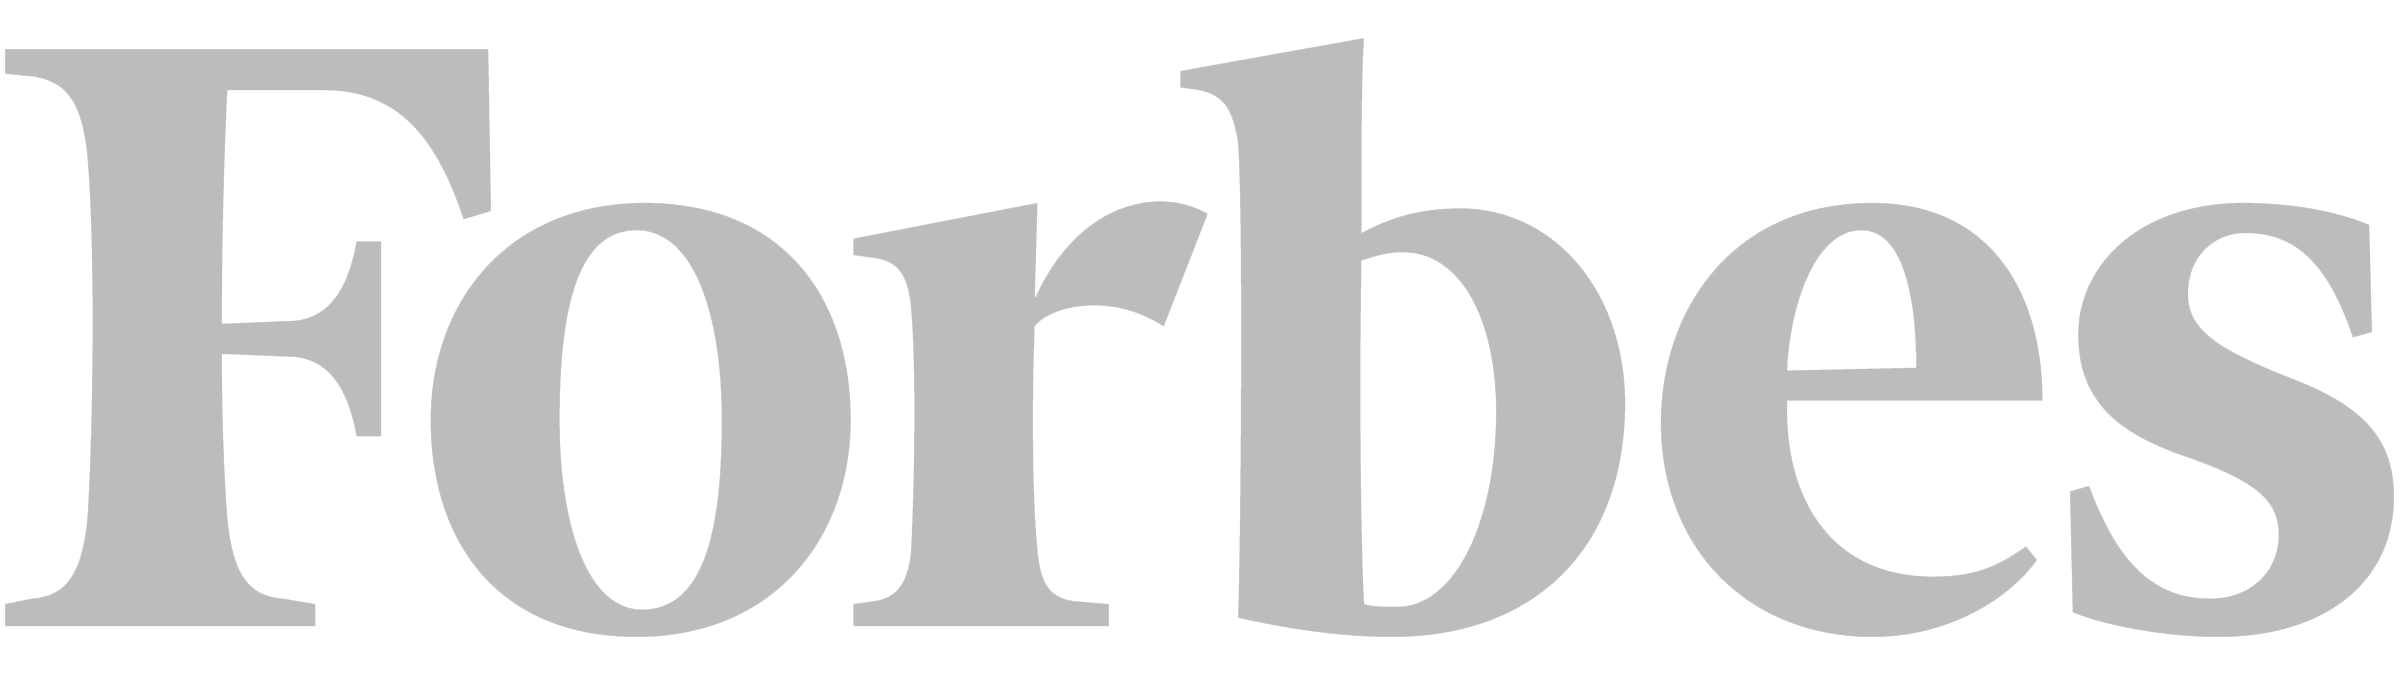 Forbes Logo PNG - 175671